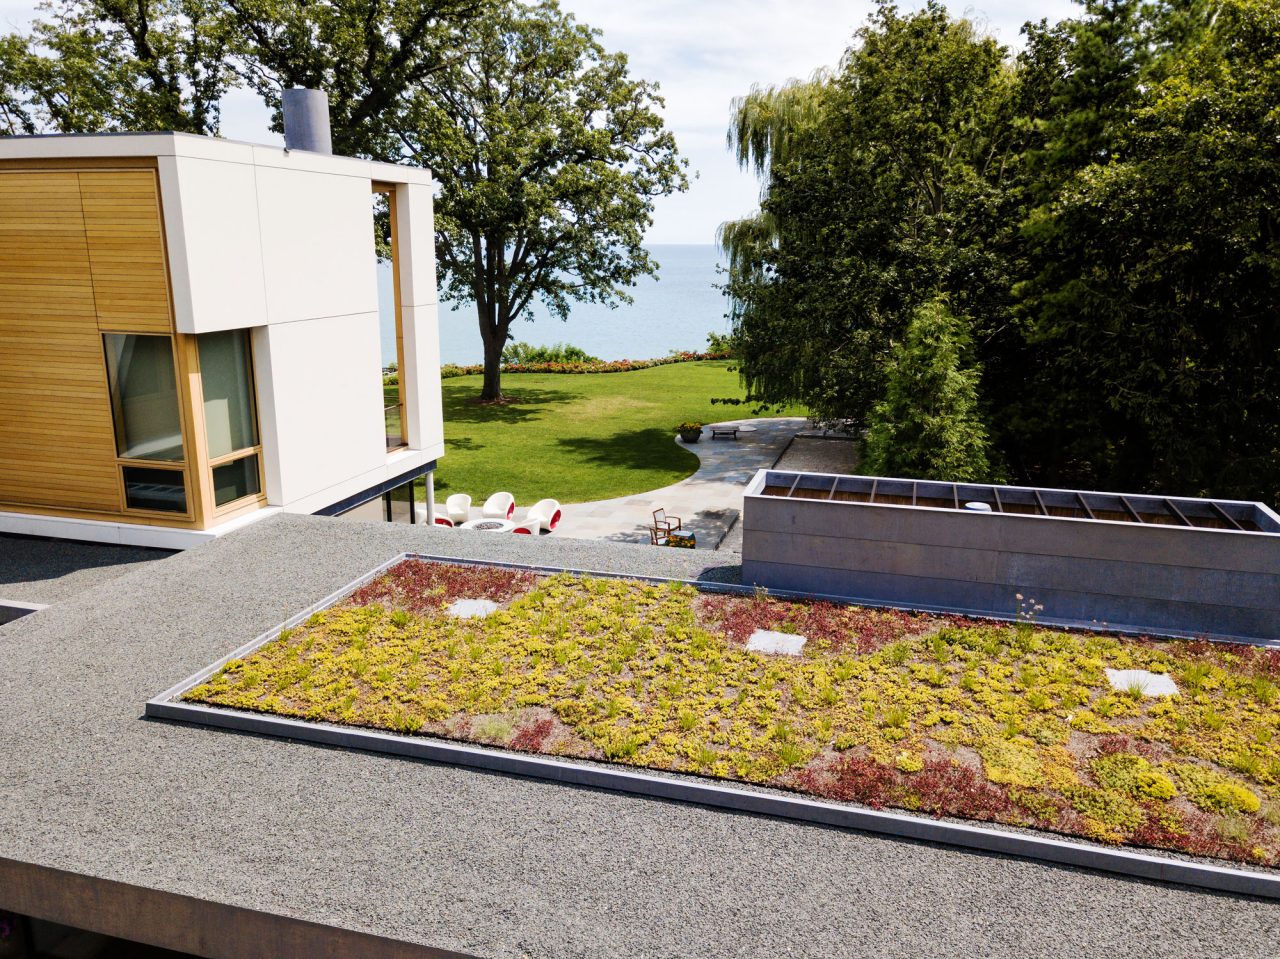 Sedum garden on garage roof overlooking the modern house, lawn, and Lake Michigan in the background.